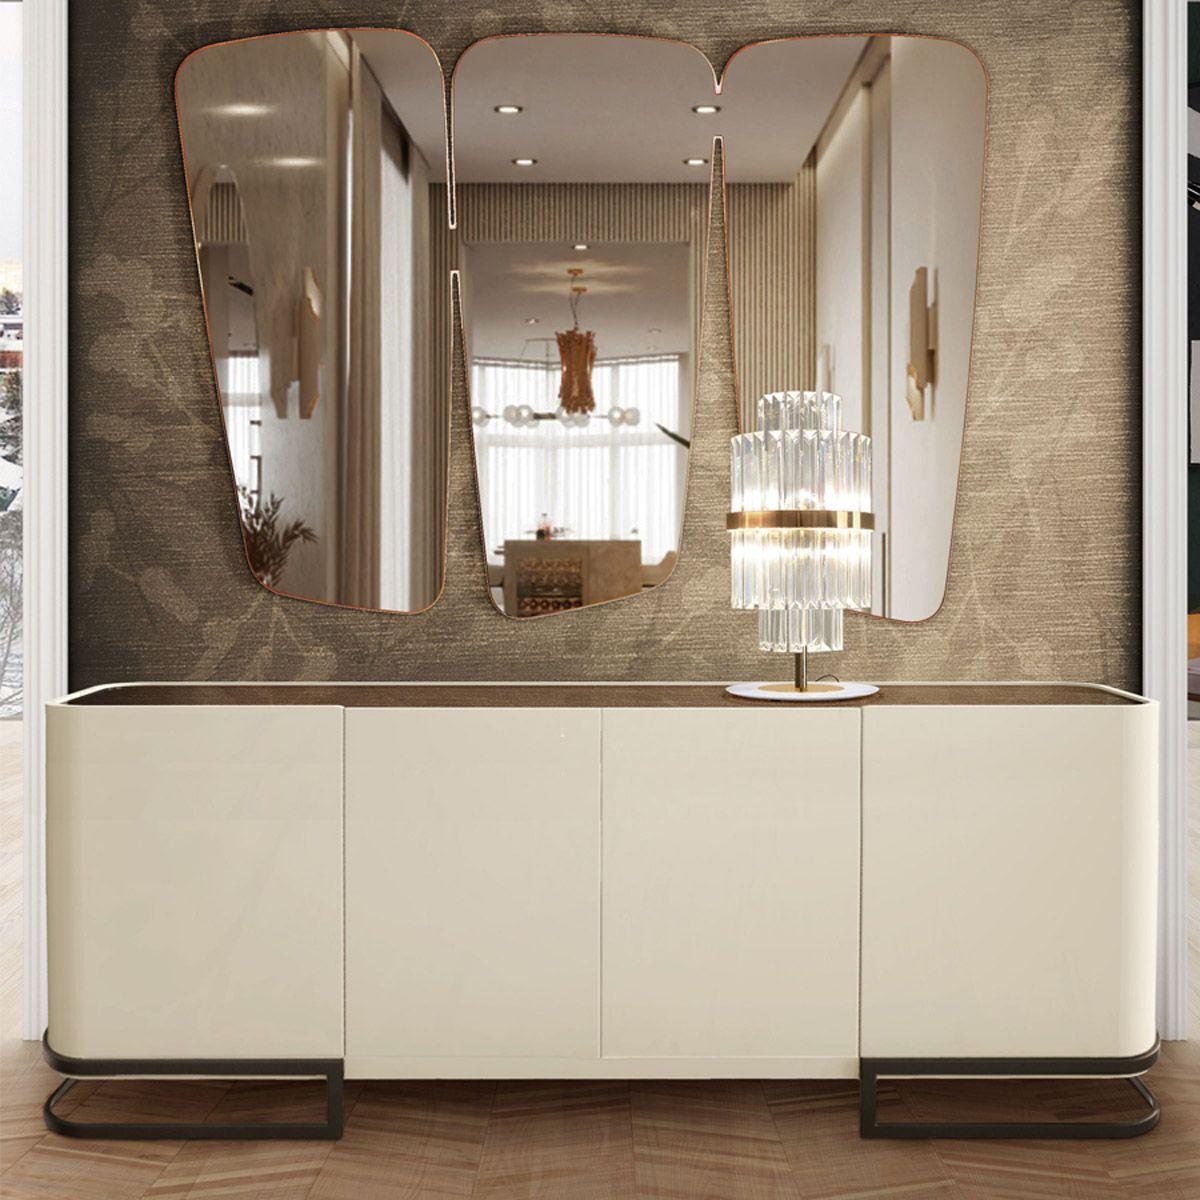 Modern Latte Lacquered High Gloss Cream Sideboard by Caffe Latte In New Condition For Sale In New York, NY